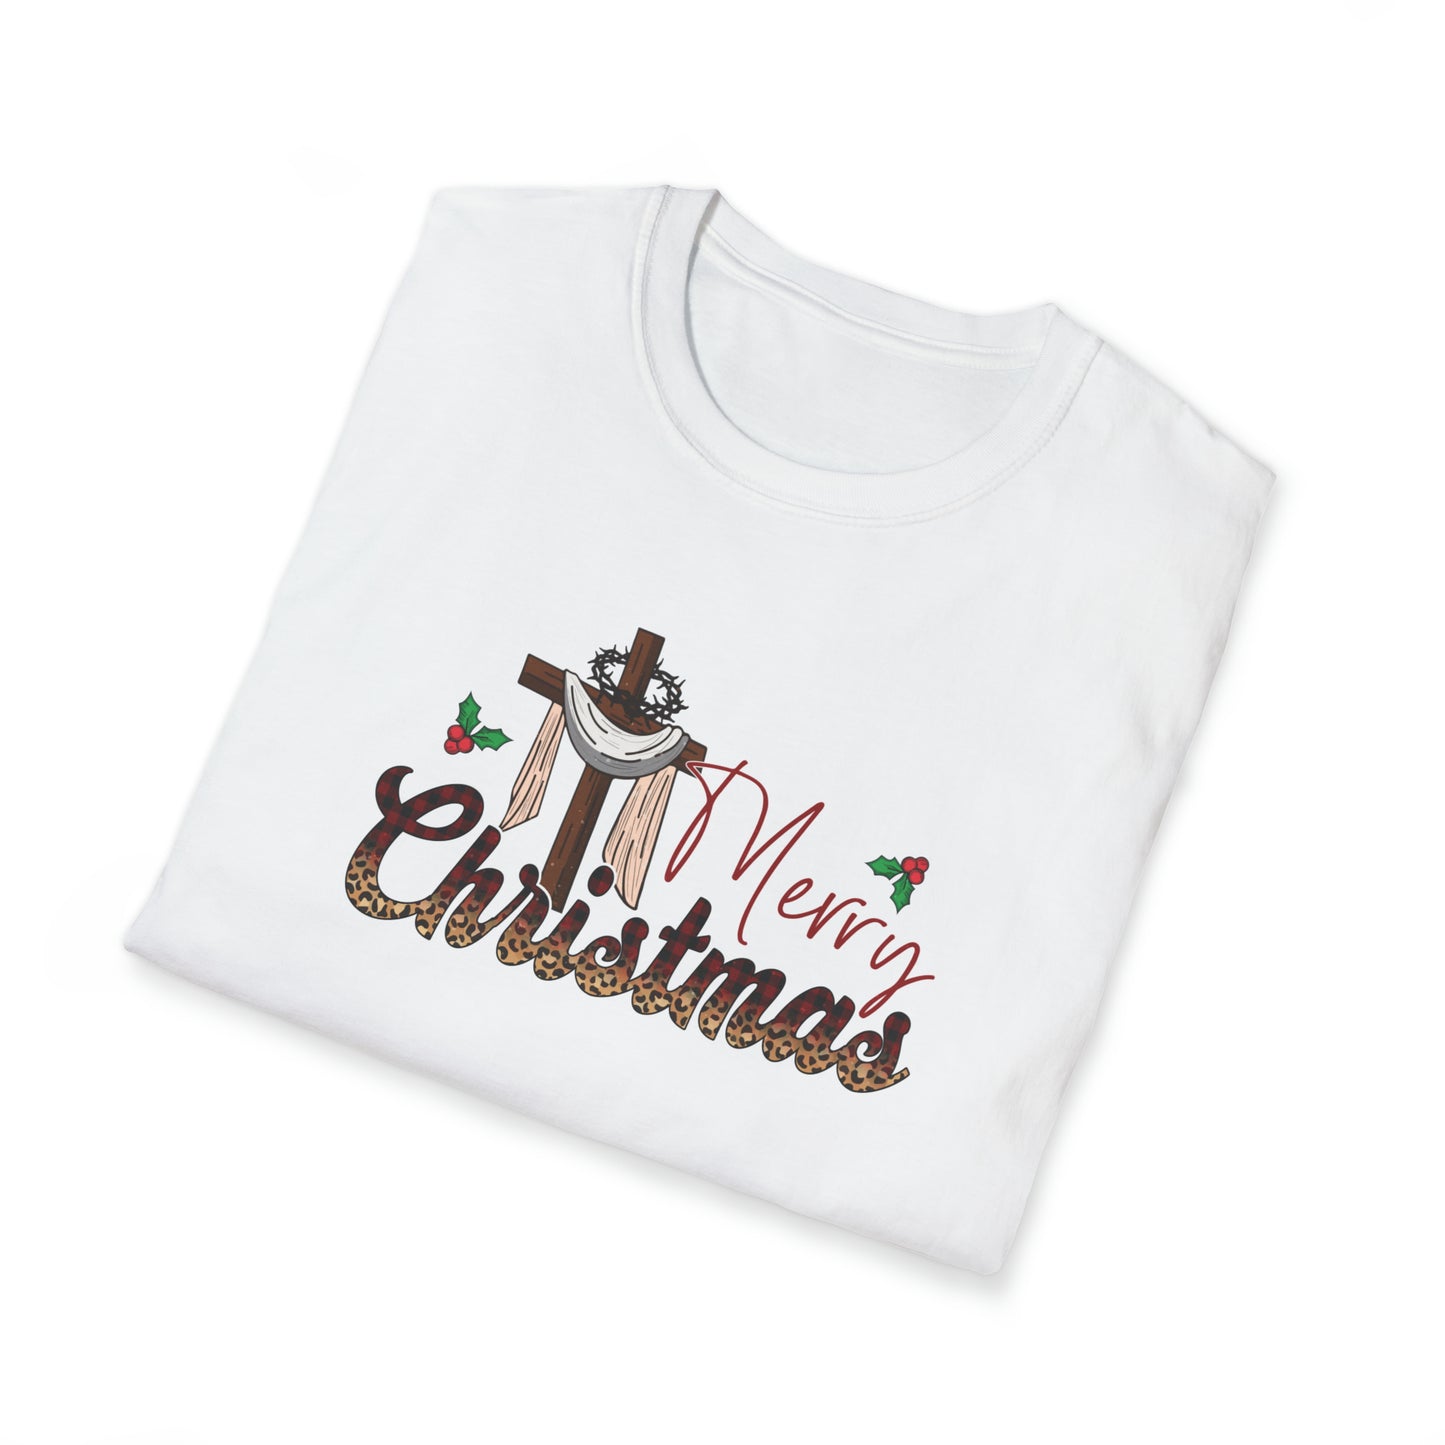 Christmas begins with Christ Southwest T-shirt